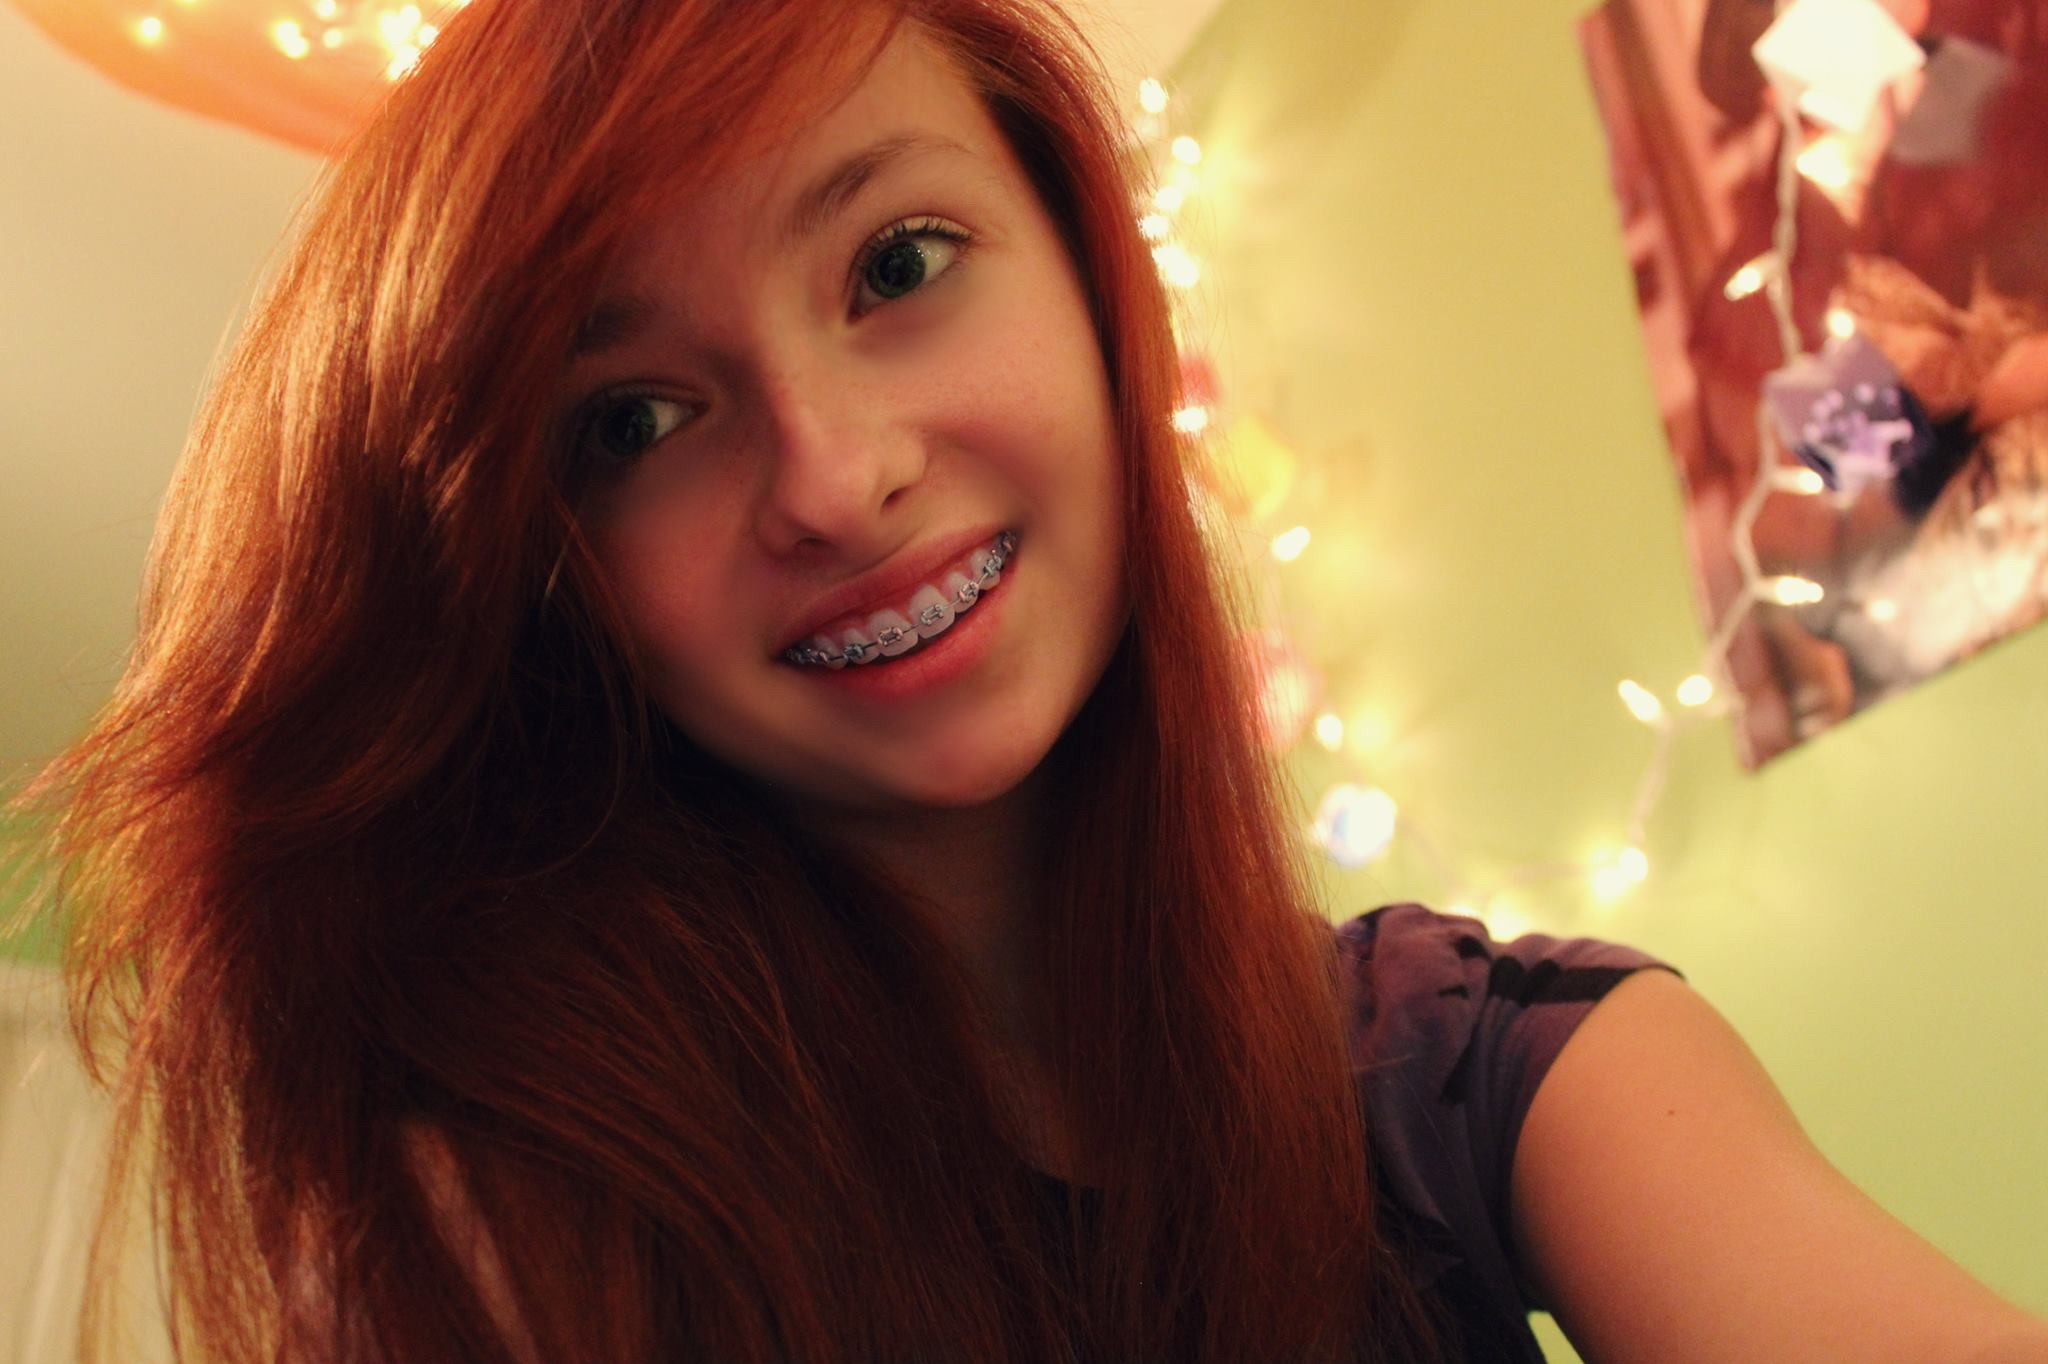 You are looking on "http://redbust.com/stuff/cute-redhead-teen/teen-re...